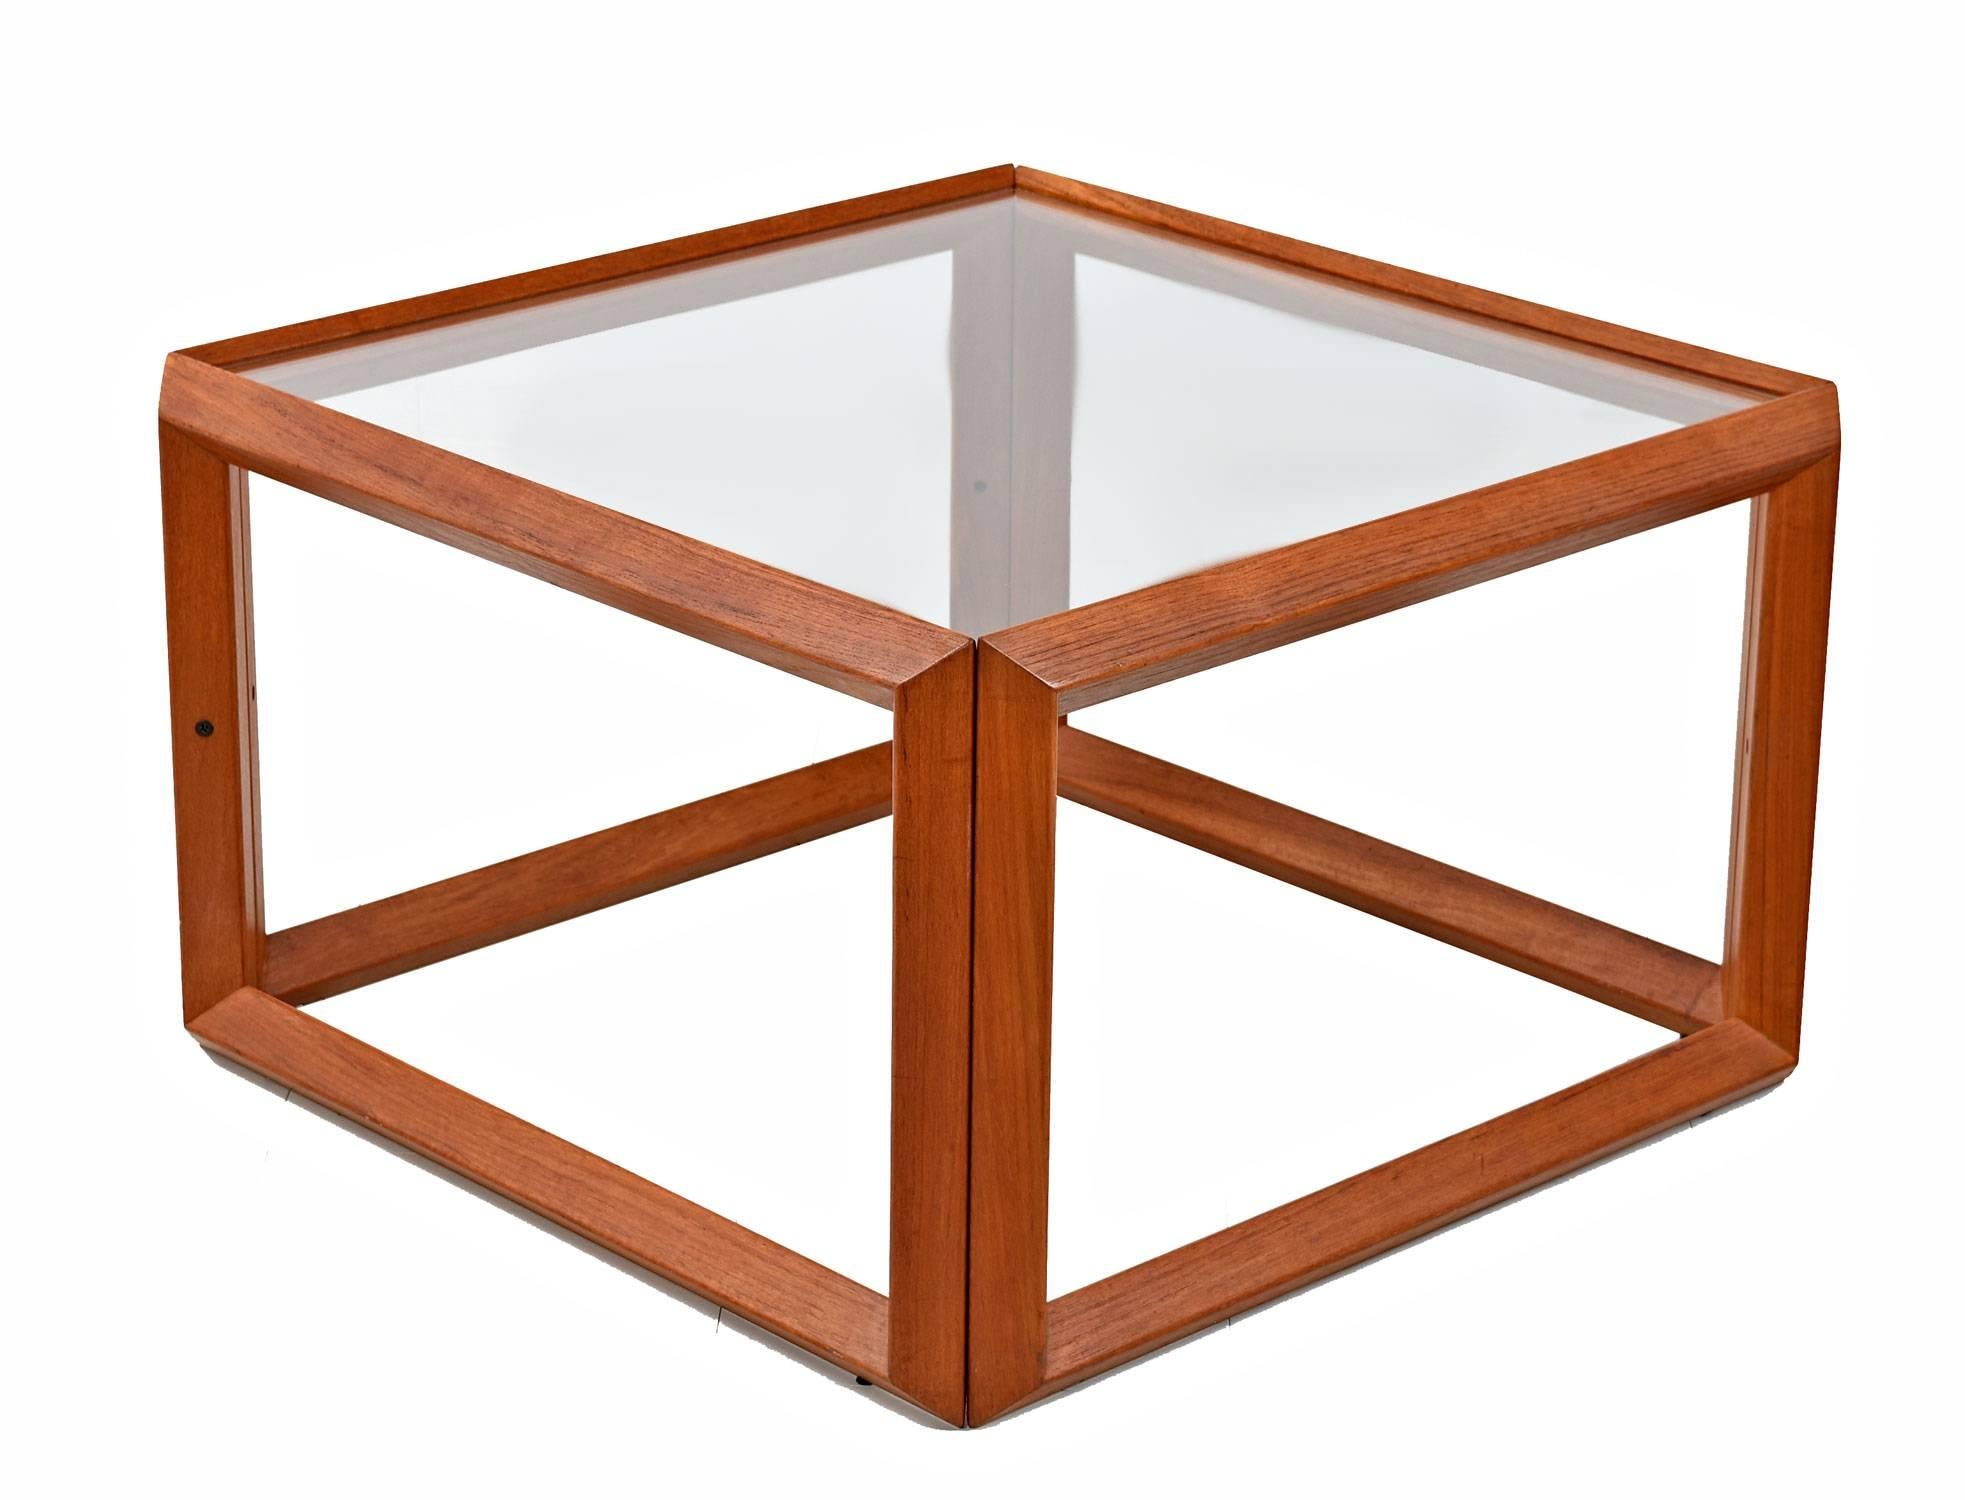 Thai Solid Teak and Glass Cubist Architectural Living Room Coffee Table End Table Set